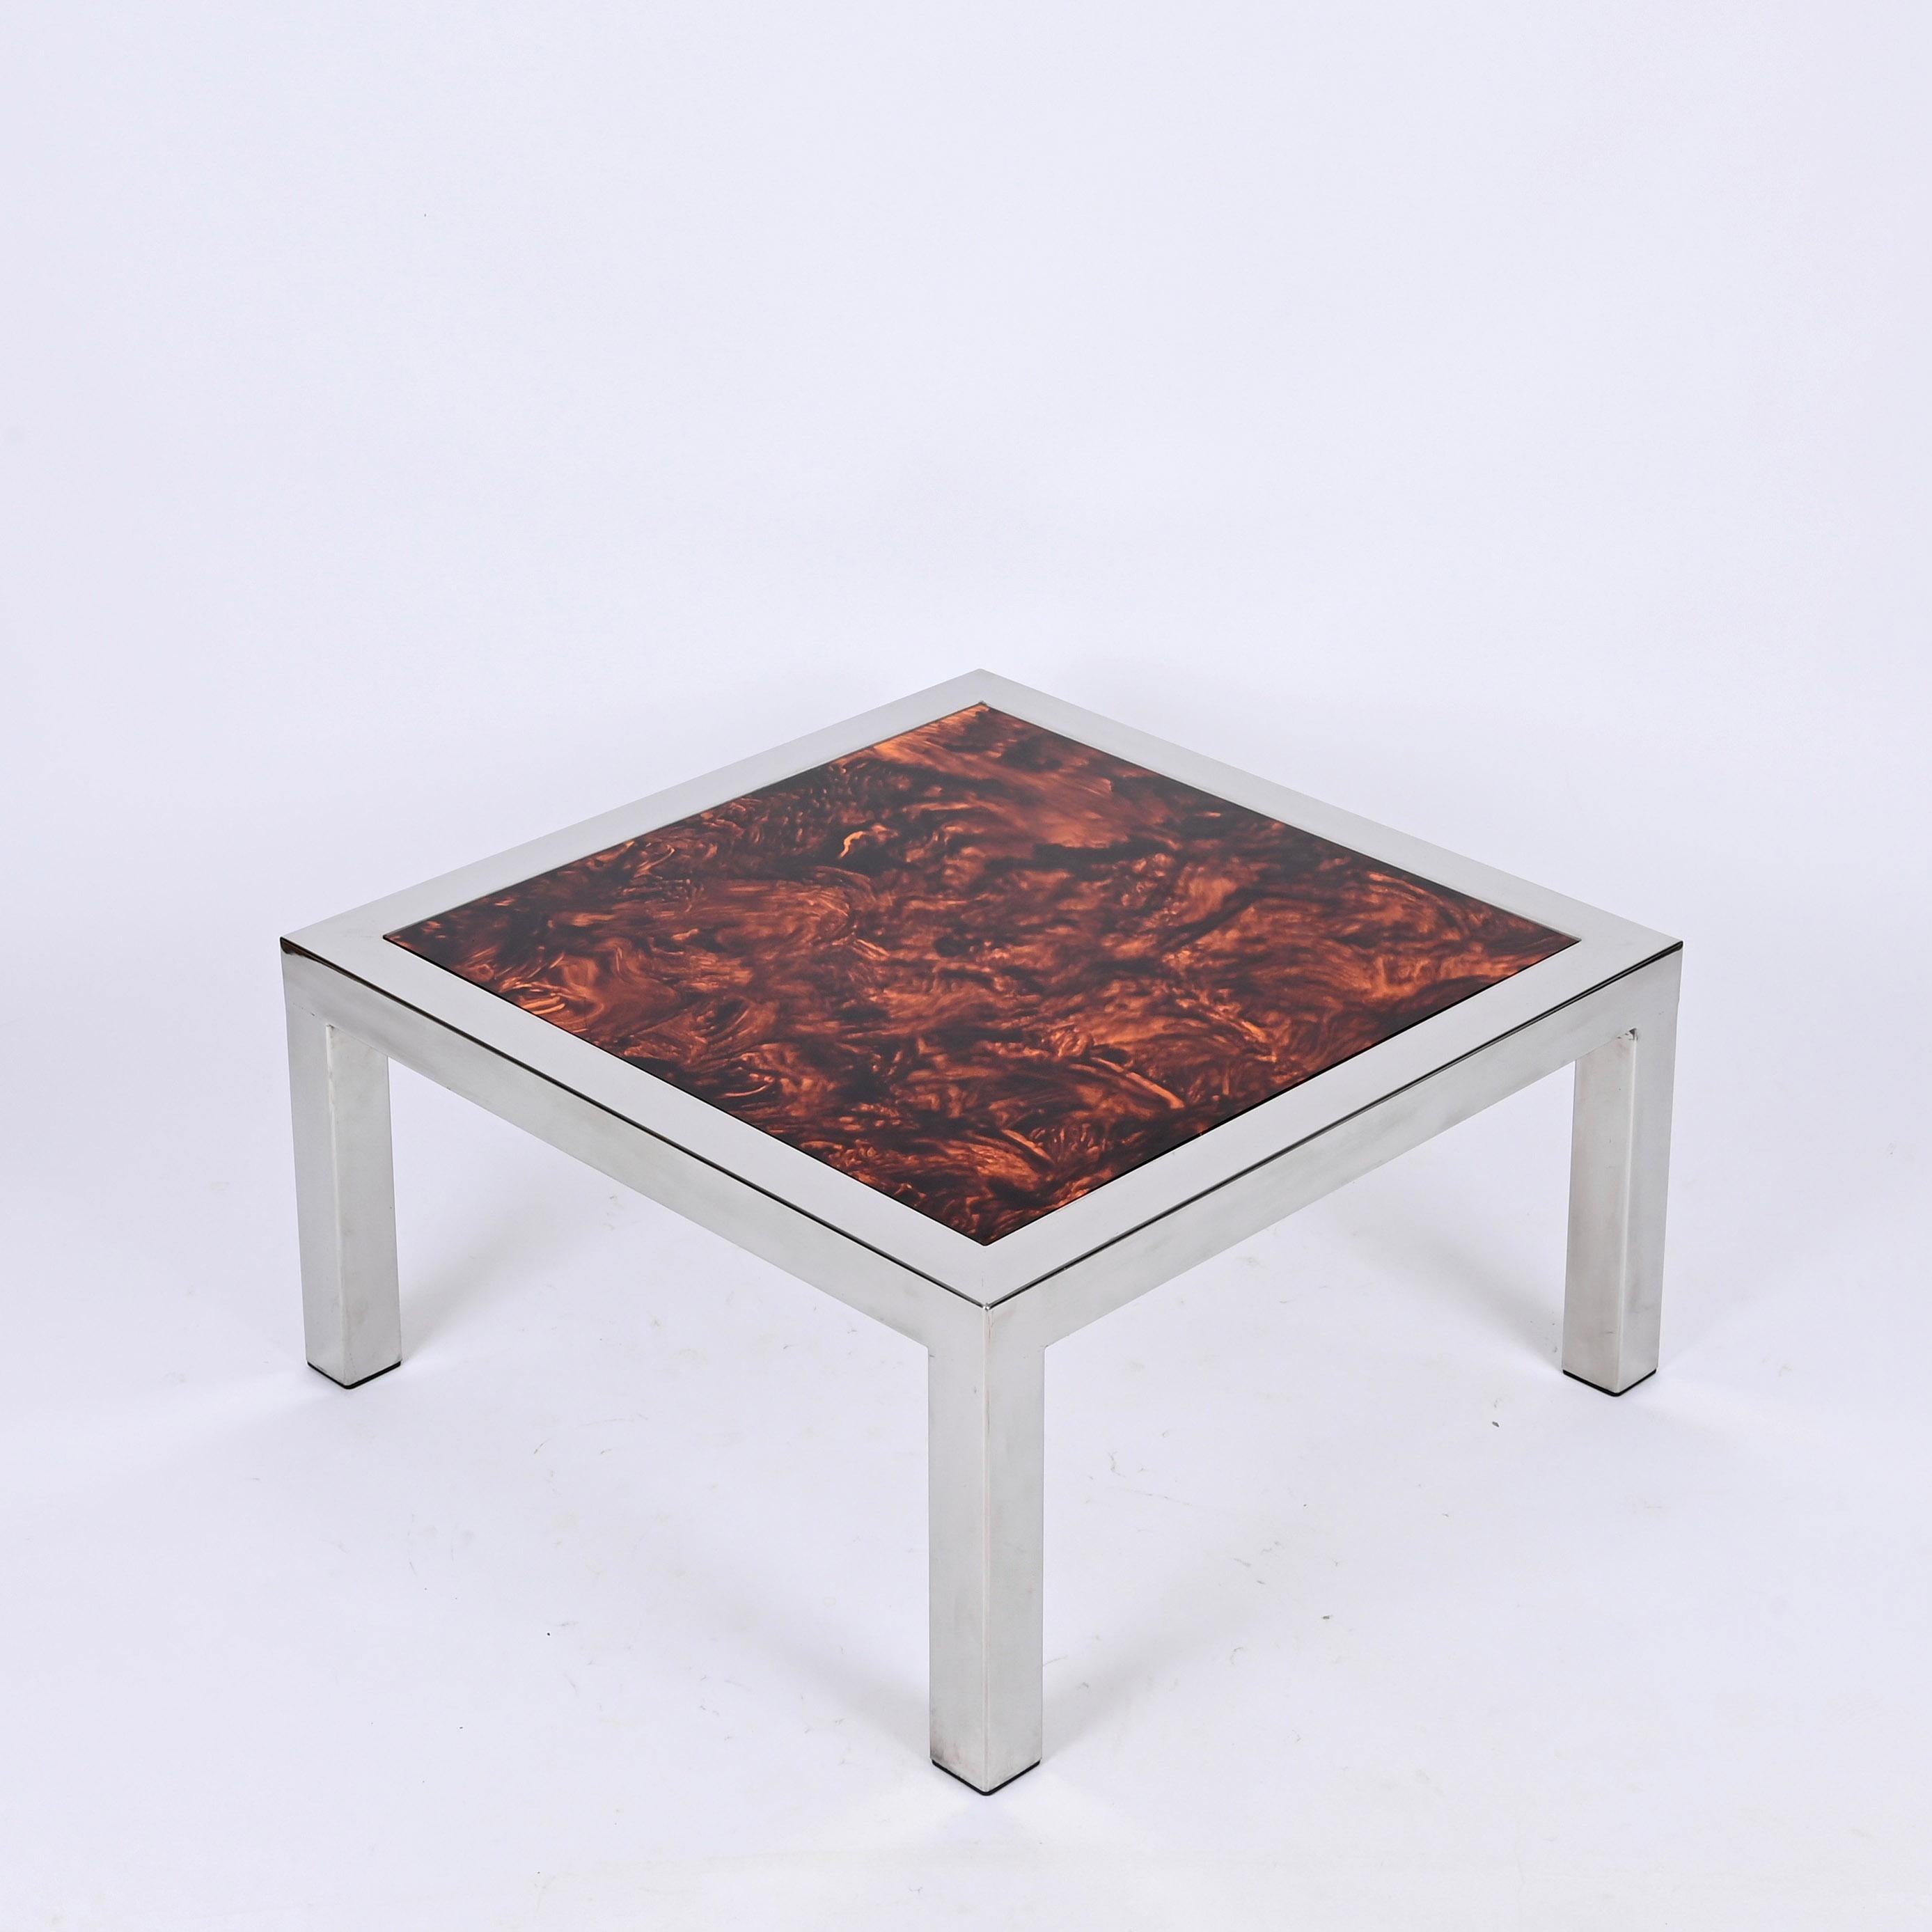 Chromed Steel and Tortoiseshell Effect Lucite Square Coffee Table, Italy 1970s For Sale 6